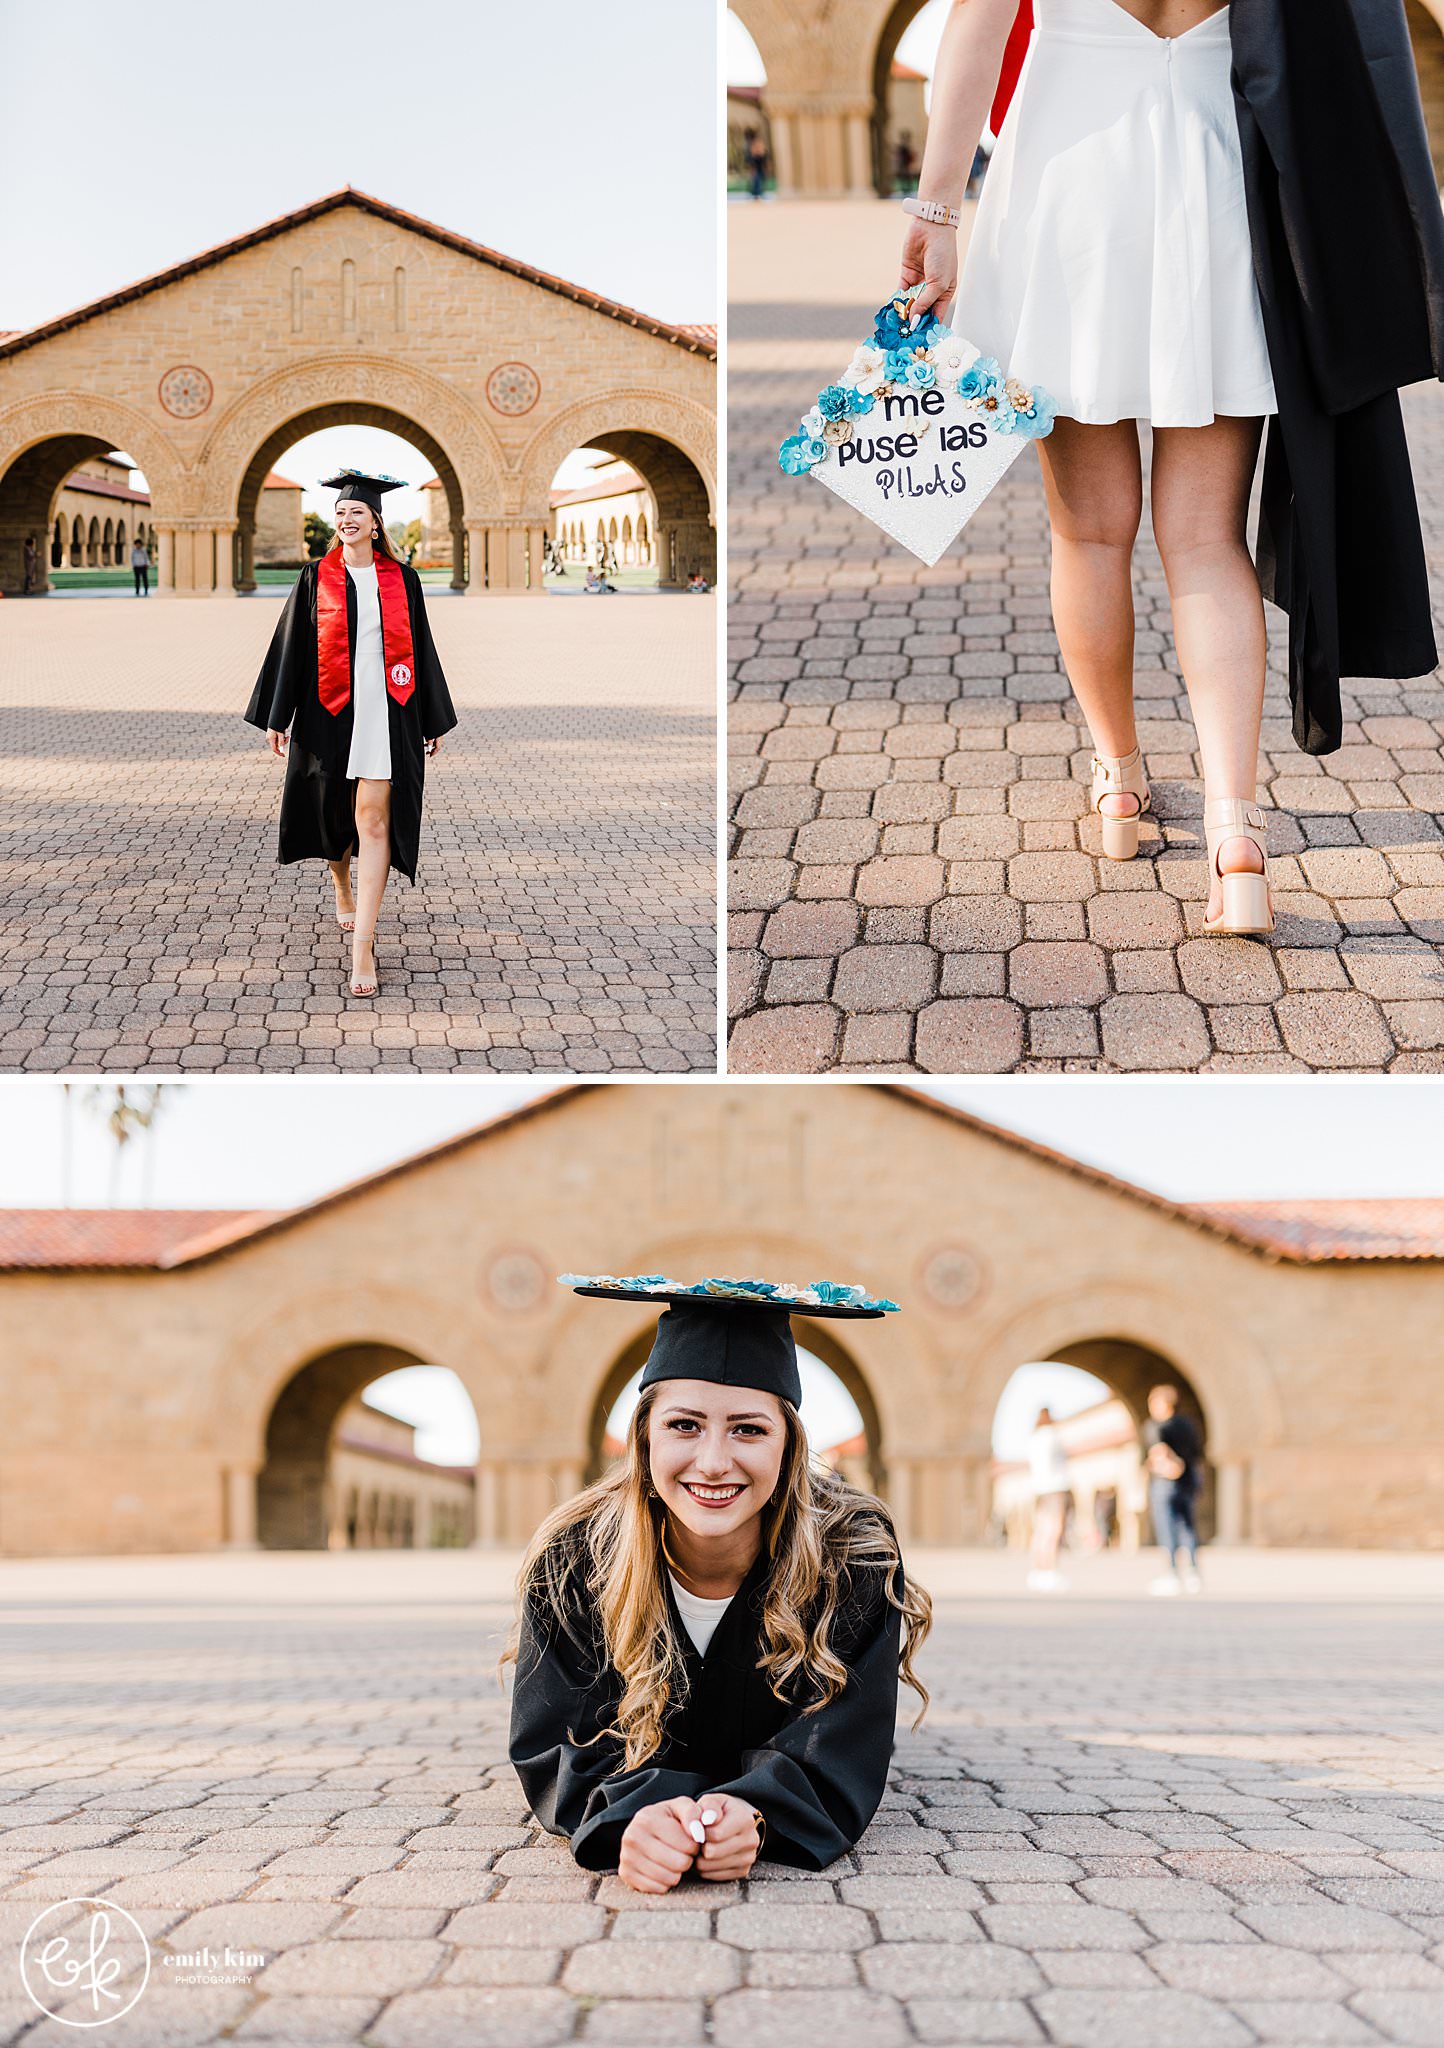 Stanford College Graduation Photos - laying down on quad and close up of hat and shoes